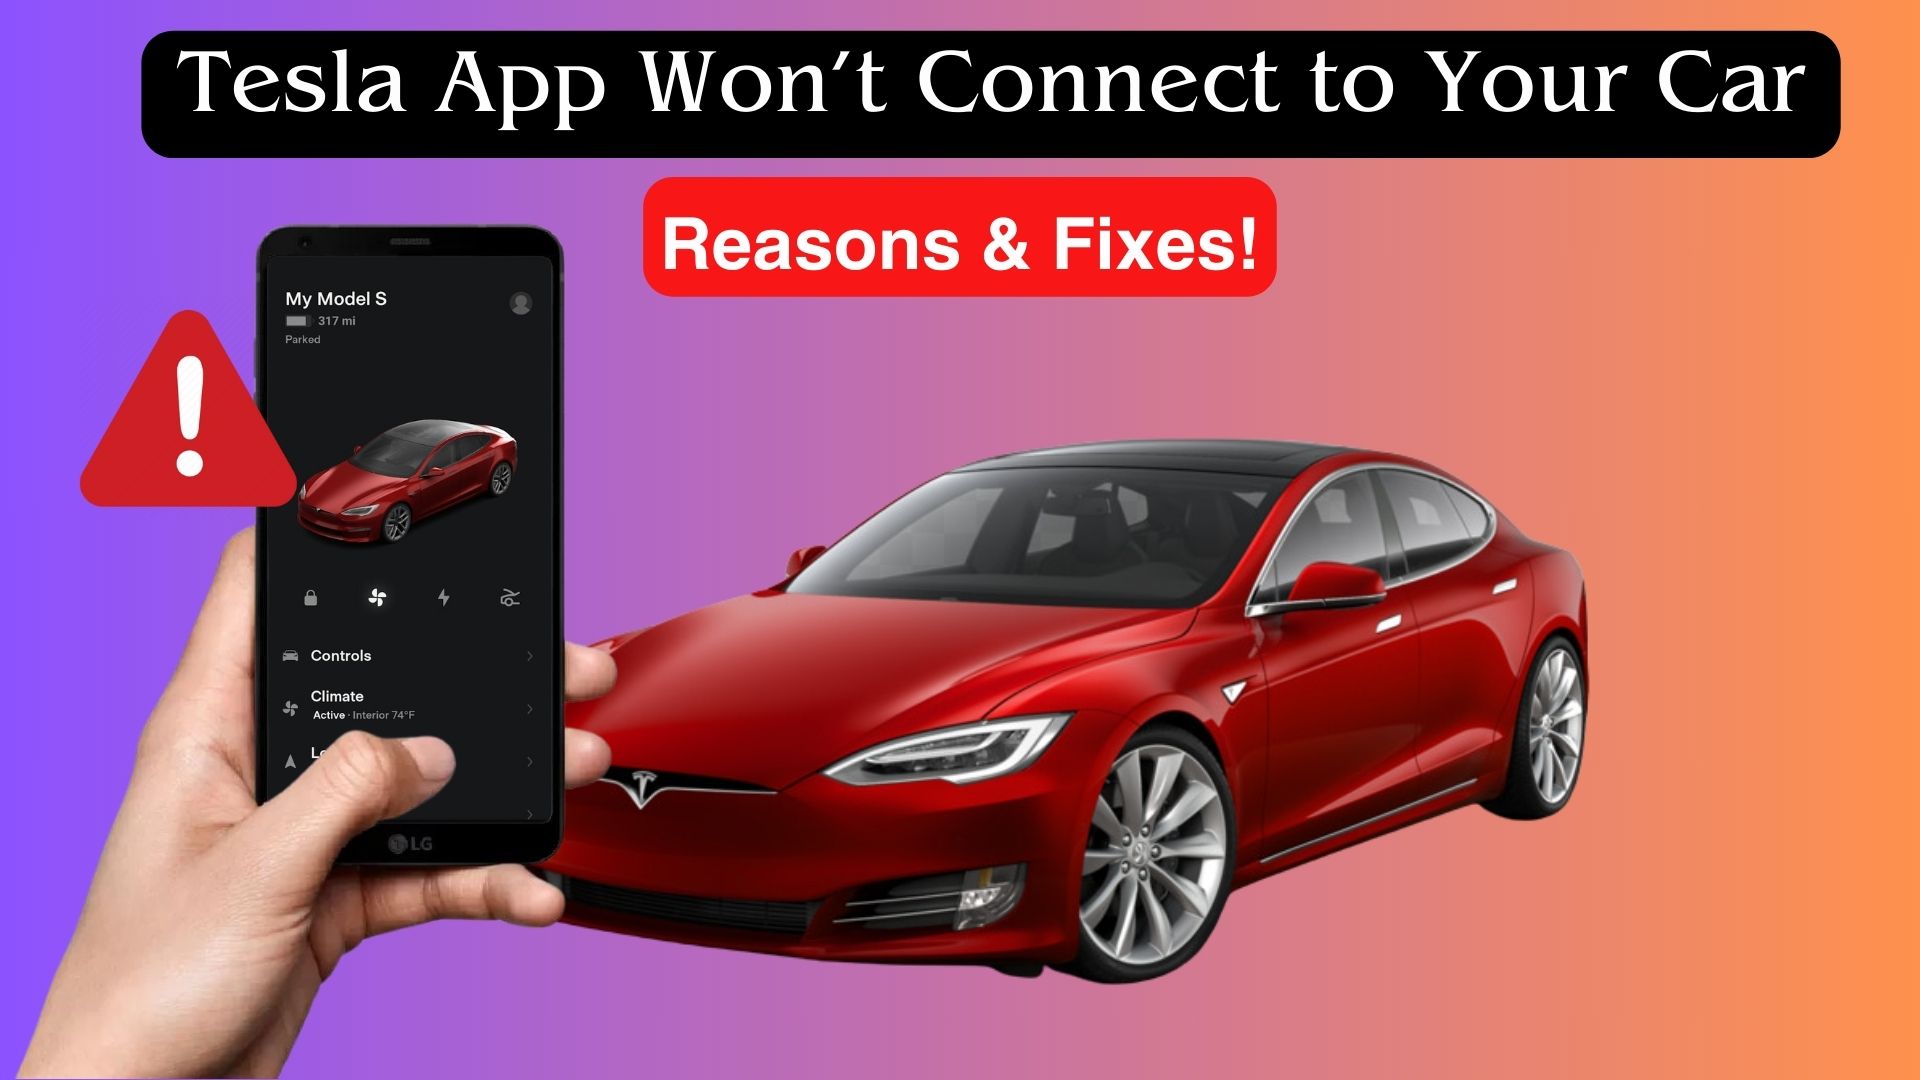 Tesla App Won’t Connect to Your Car: Reasons & Fixes!